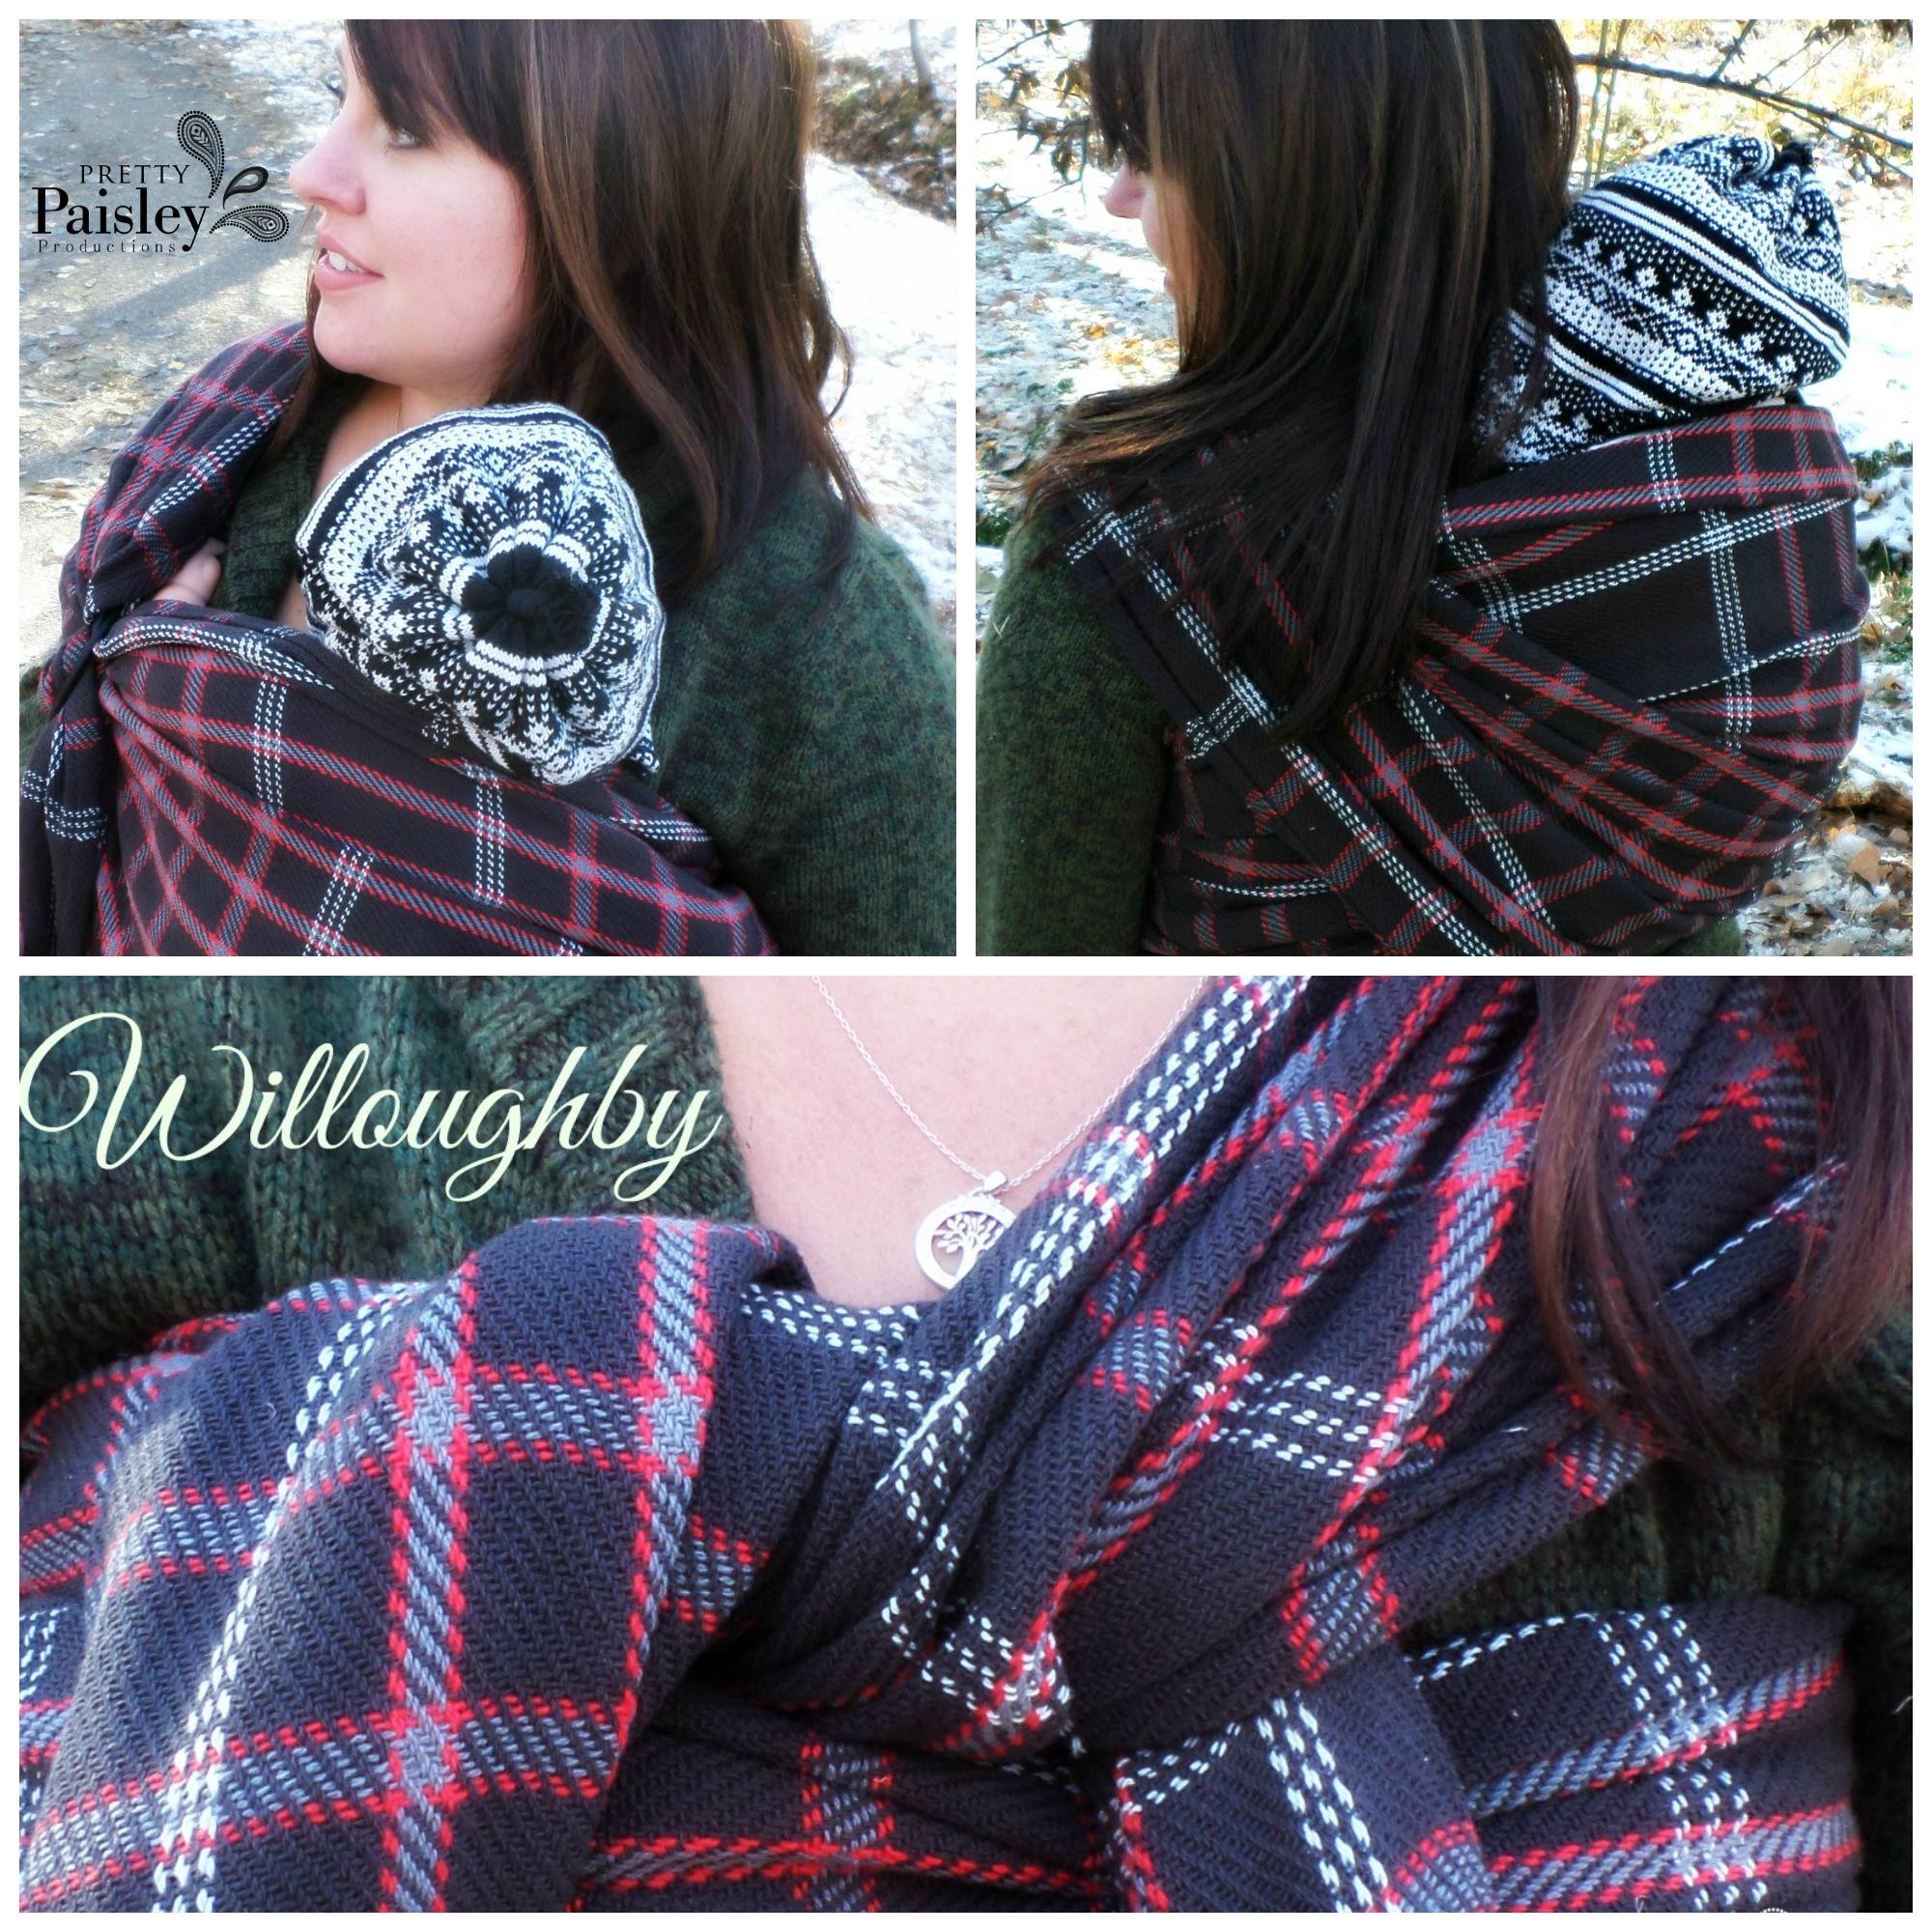 Pretty Paisley Production checkered WILLOUGHBY Wrap  Image